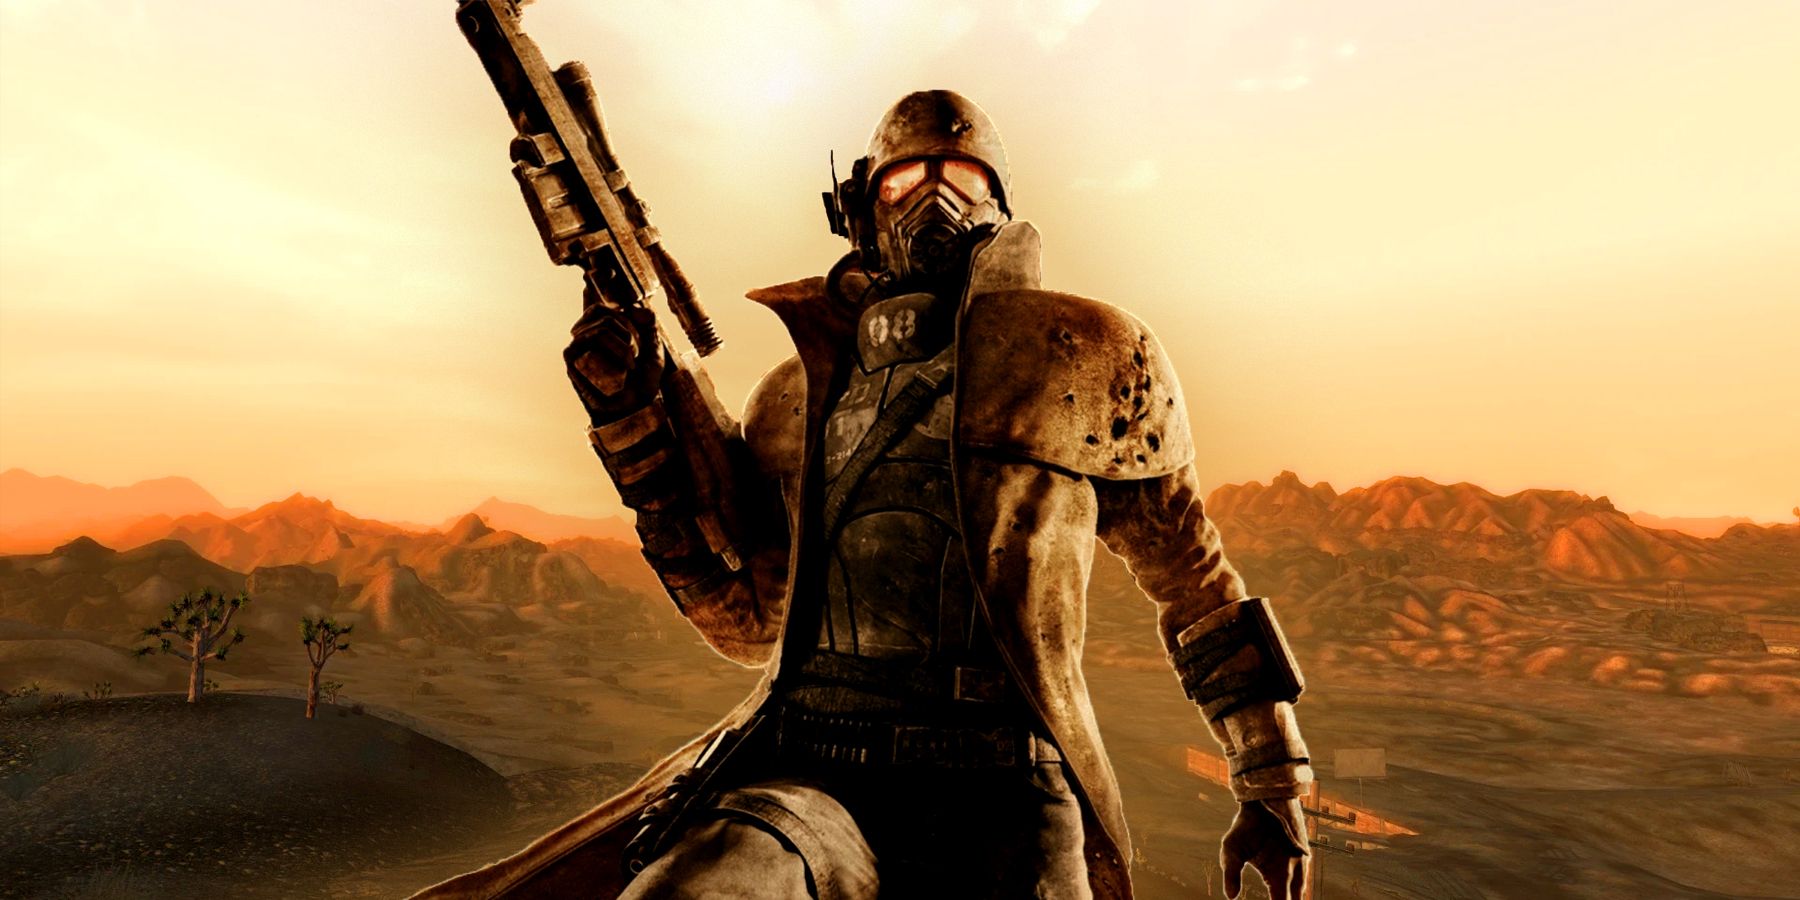 The Courier from Fallout New Vegas in front of a desert with a soft orange sky.